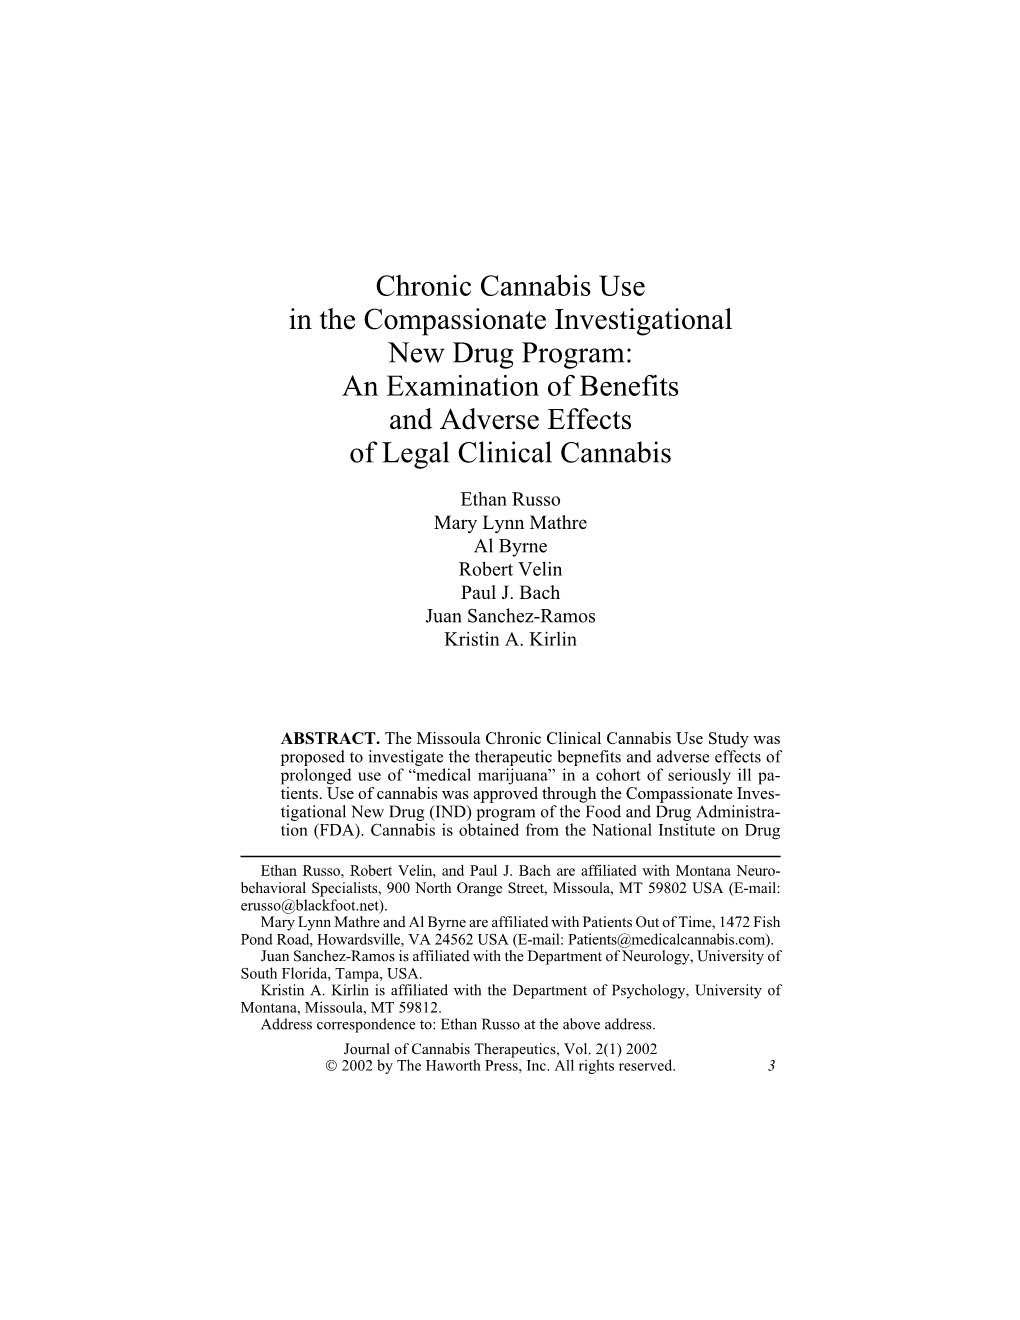 Chronic Cannabis Use in the Compassionate Investigational New Drug Program: an Examination of Benefits and Adverse Effects of Legal Clinical Cannabis